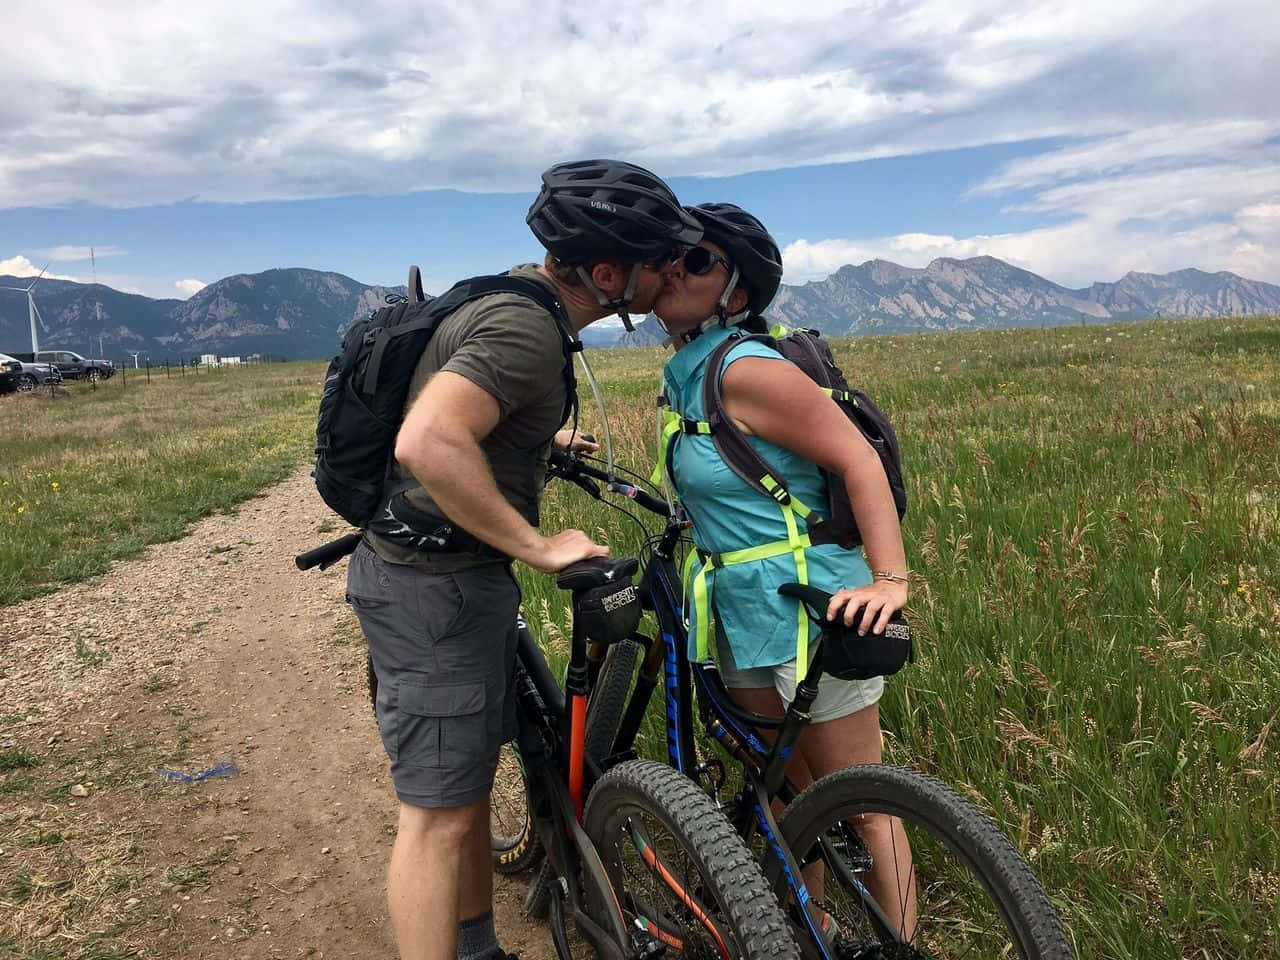 Couple Biker On Trails Pictures